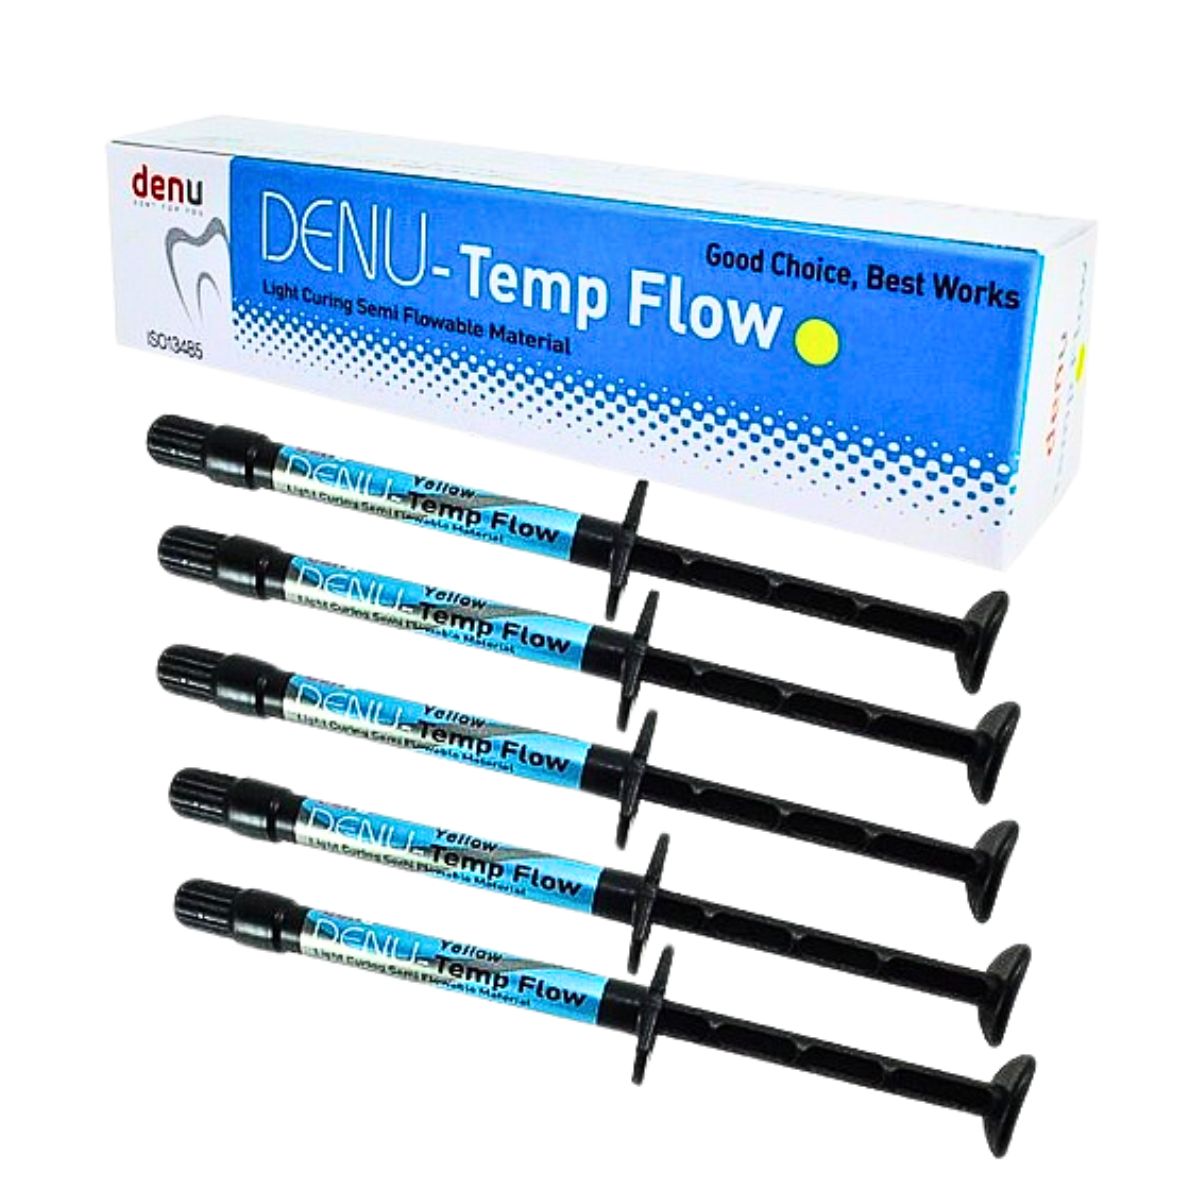 Denu Temp Flow Light Curing Material Yellow 5 syringes 2g